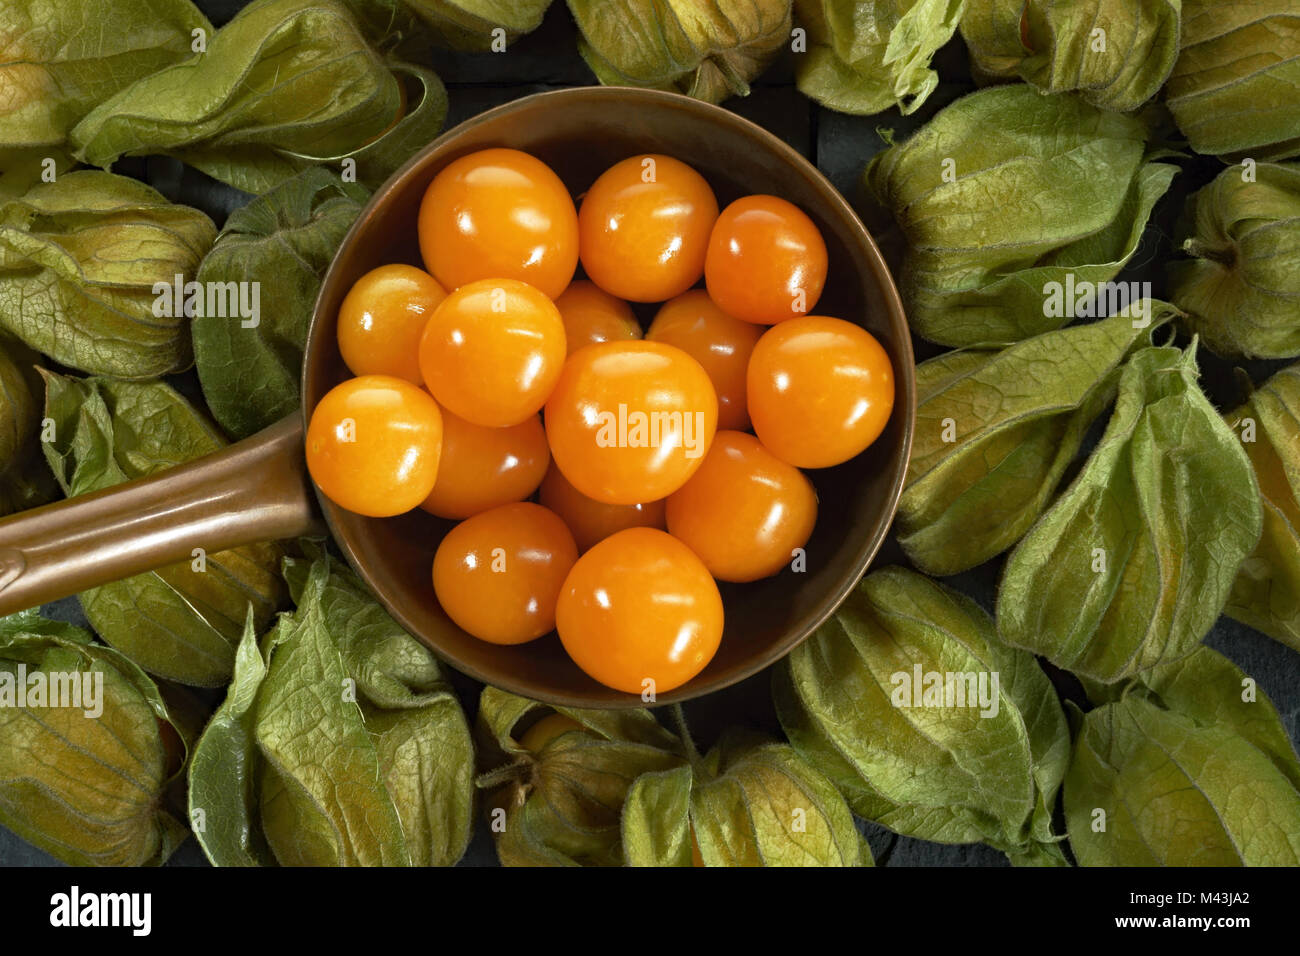 Physalis, an exotic fruit, a copper saucepan with yellow-orange fruits in green leaves Stock Photo